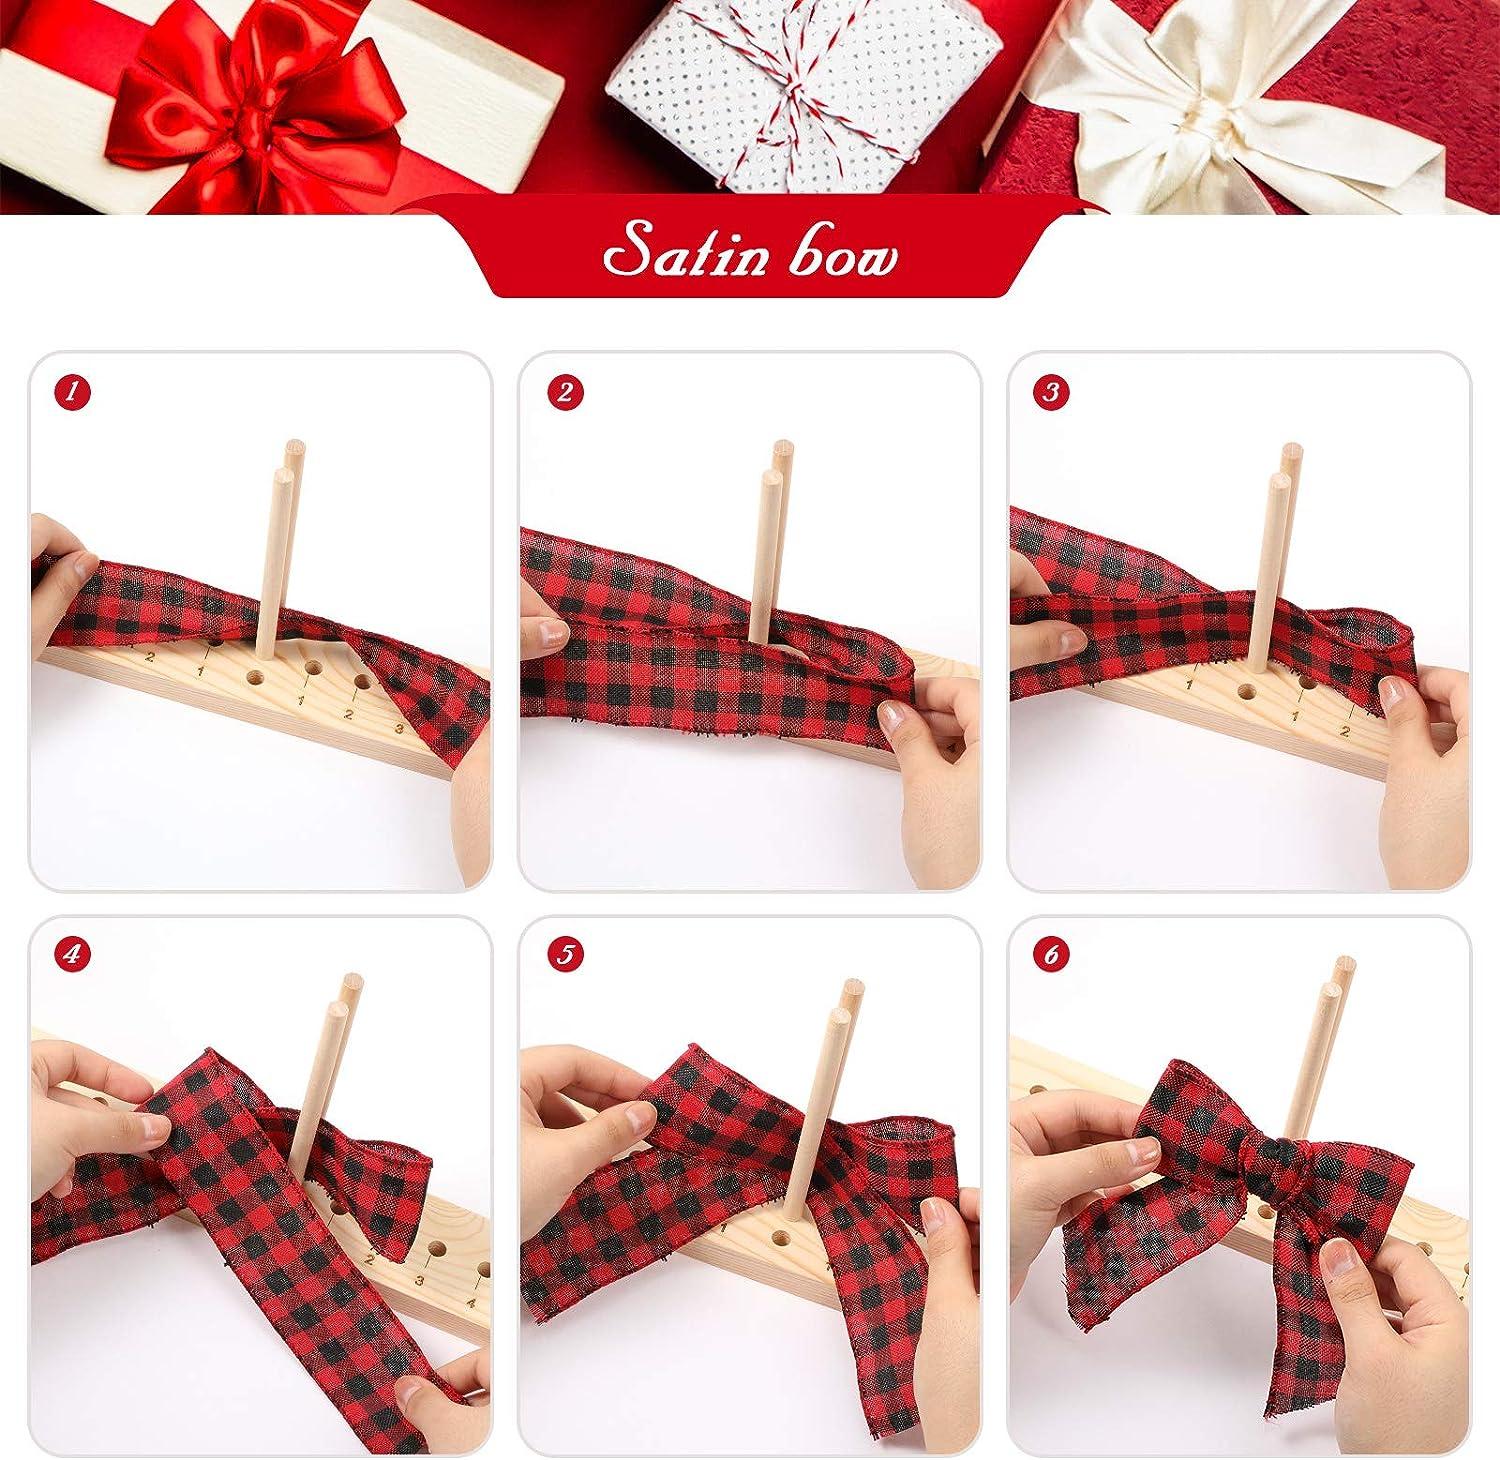  Bow Maker for Ribbon for Wreath Wooden Bow Making Tool with Bow  Wire and Twist Tie for Creating Present Bows Hair Bows Corsages Christmas  Wreaths Various Crafts Holiday Party Decorations Supplies 